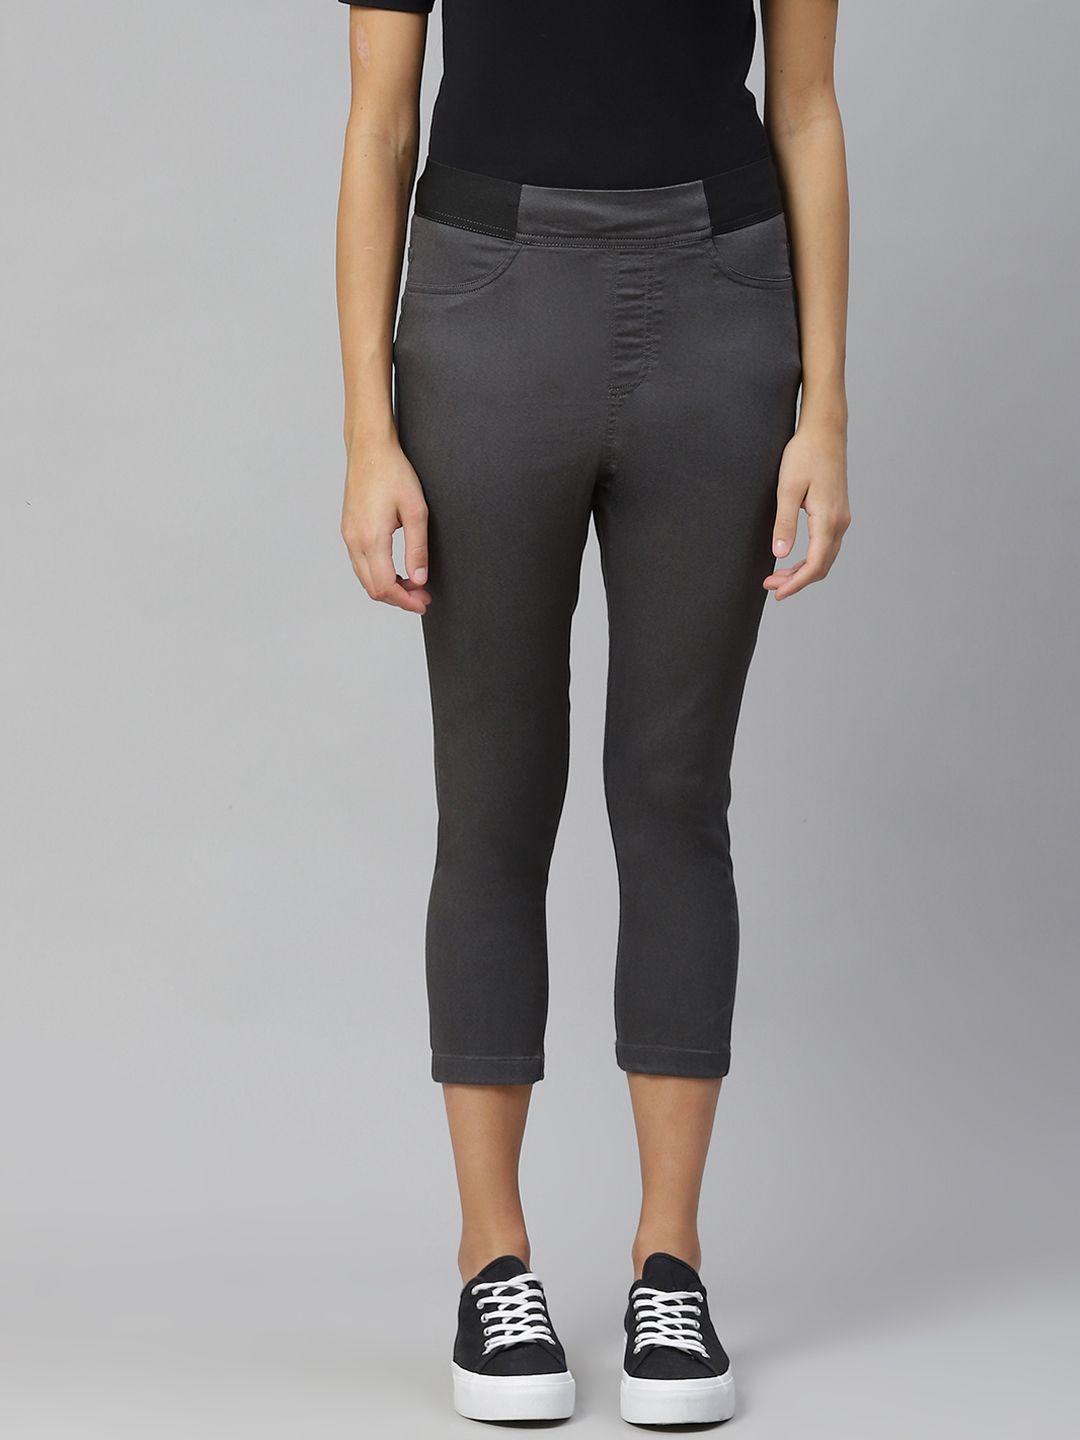 marks-&-spencer-women-charcoal-grey-solid-cropped-jeggings